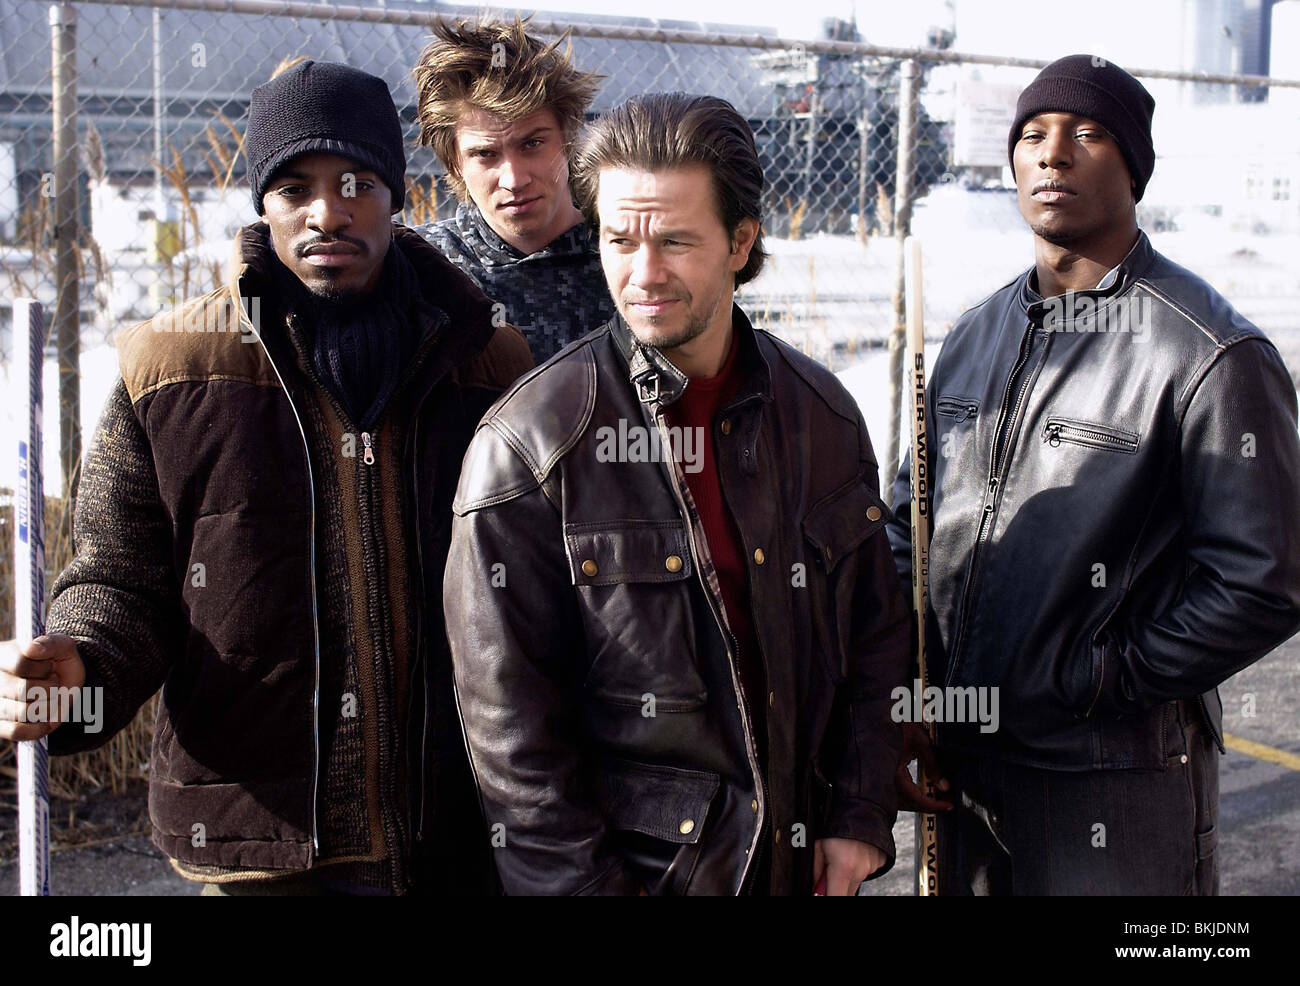 FOUR BROTHERS (2005) ANDRE BENJAMIN, GARRETT HEDLUND, MARK WAHLBERG, TYRESE GIBSON FBRO 002-001 Stock Photo